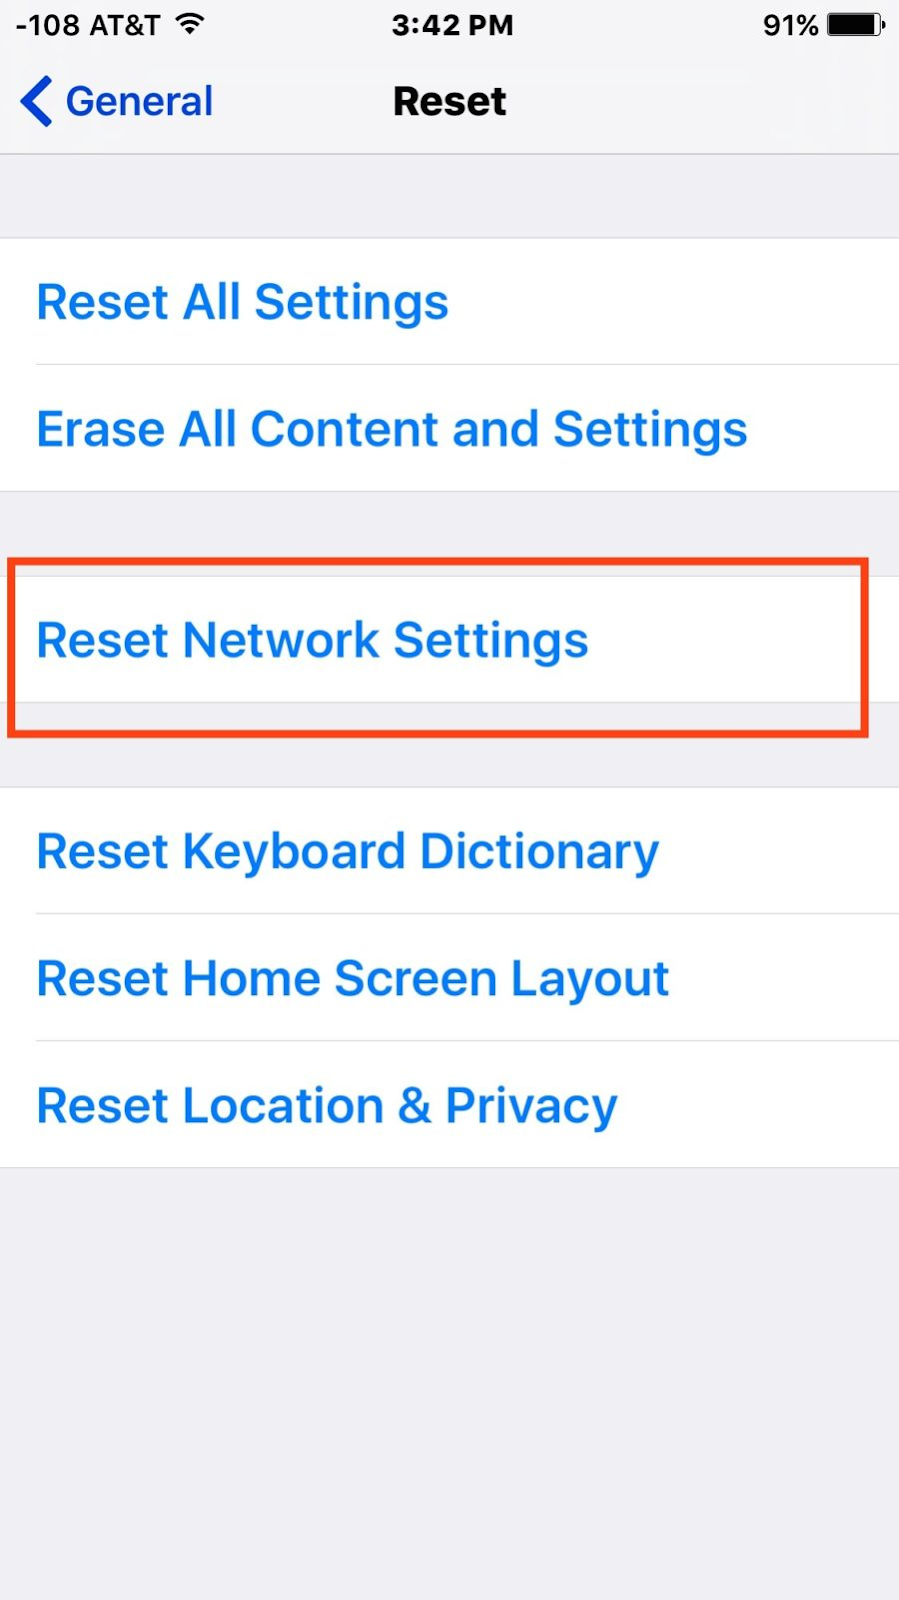 Resetting Your Network Settings